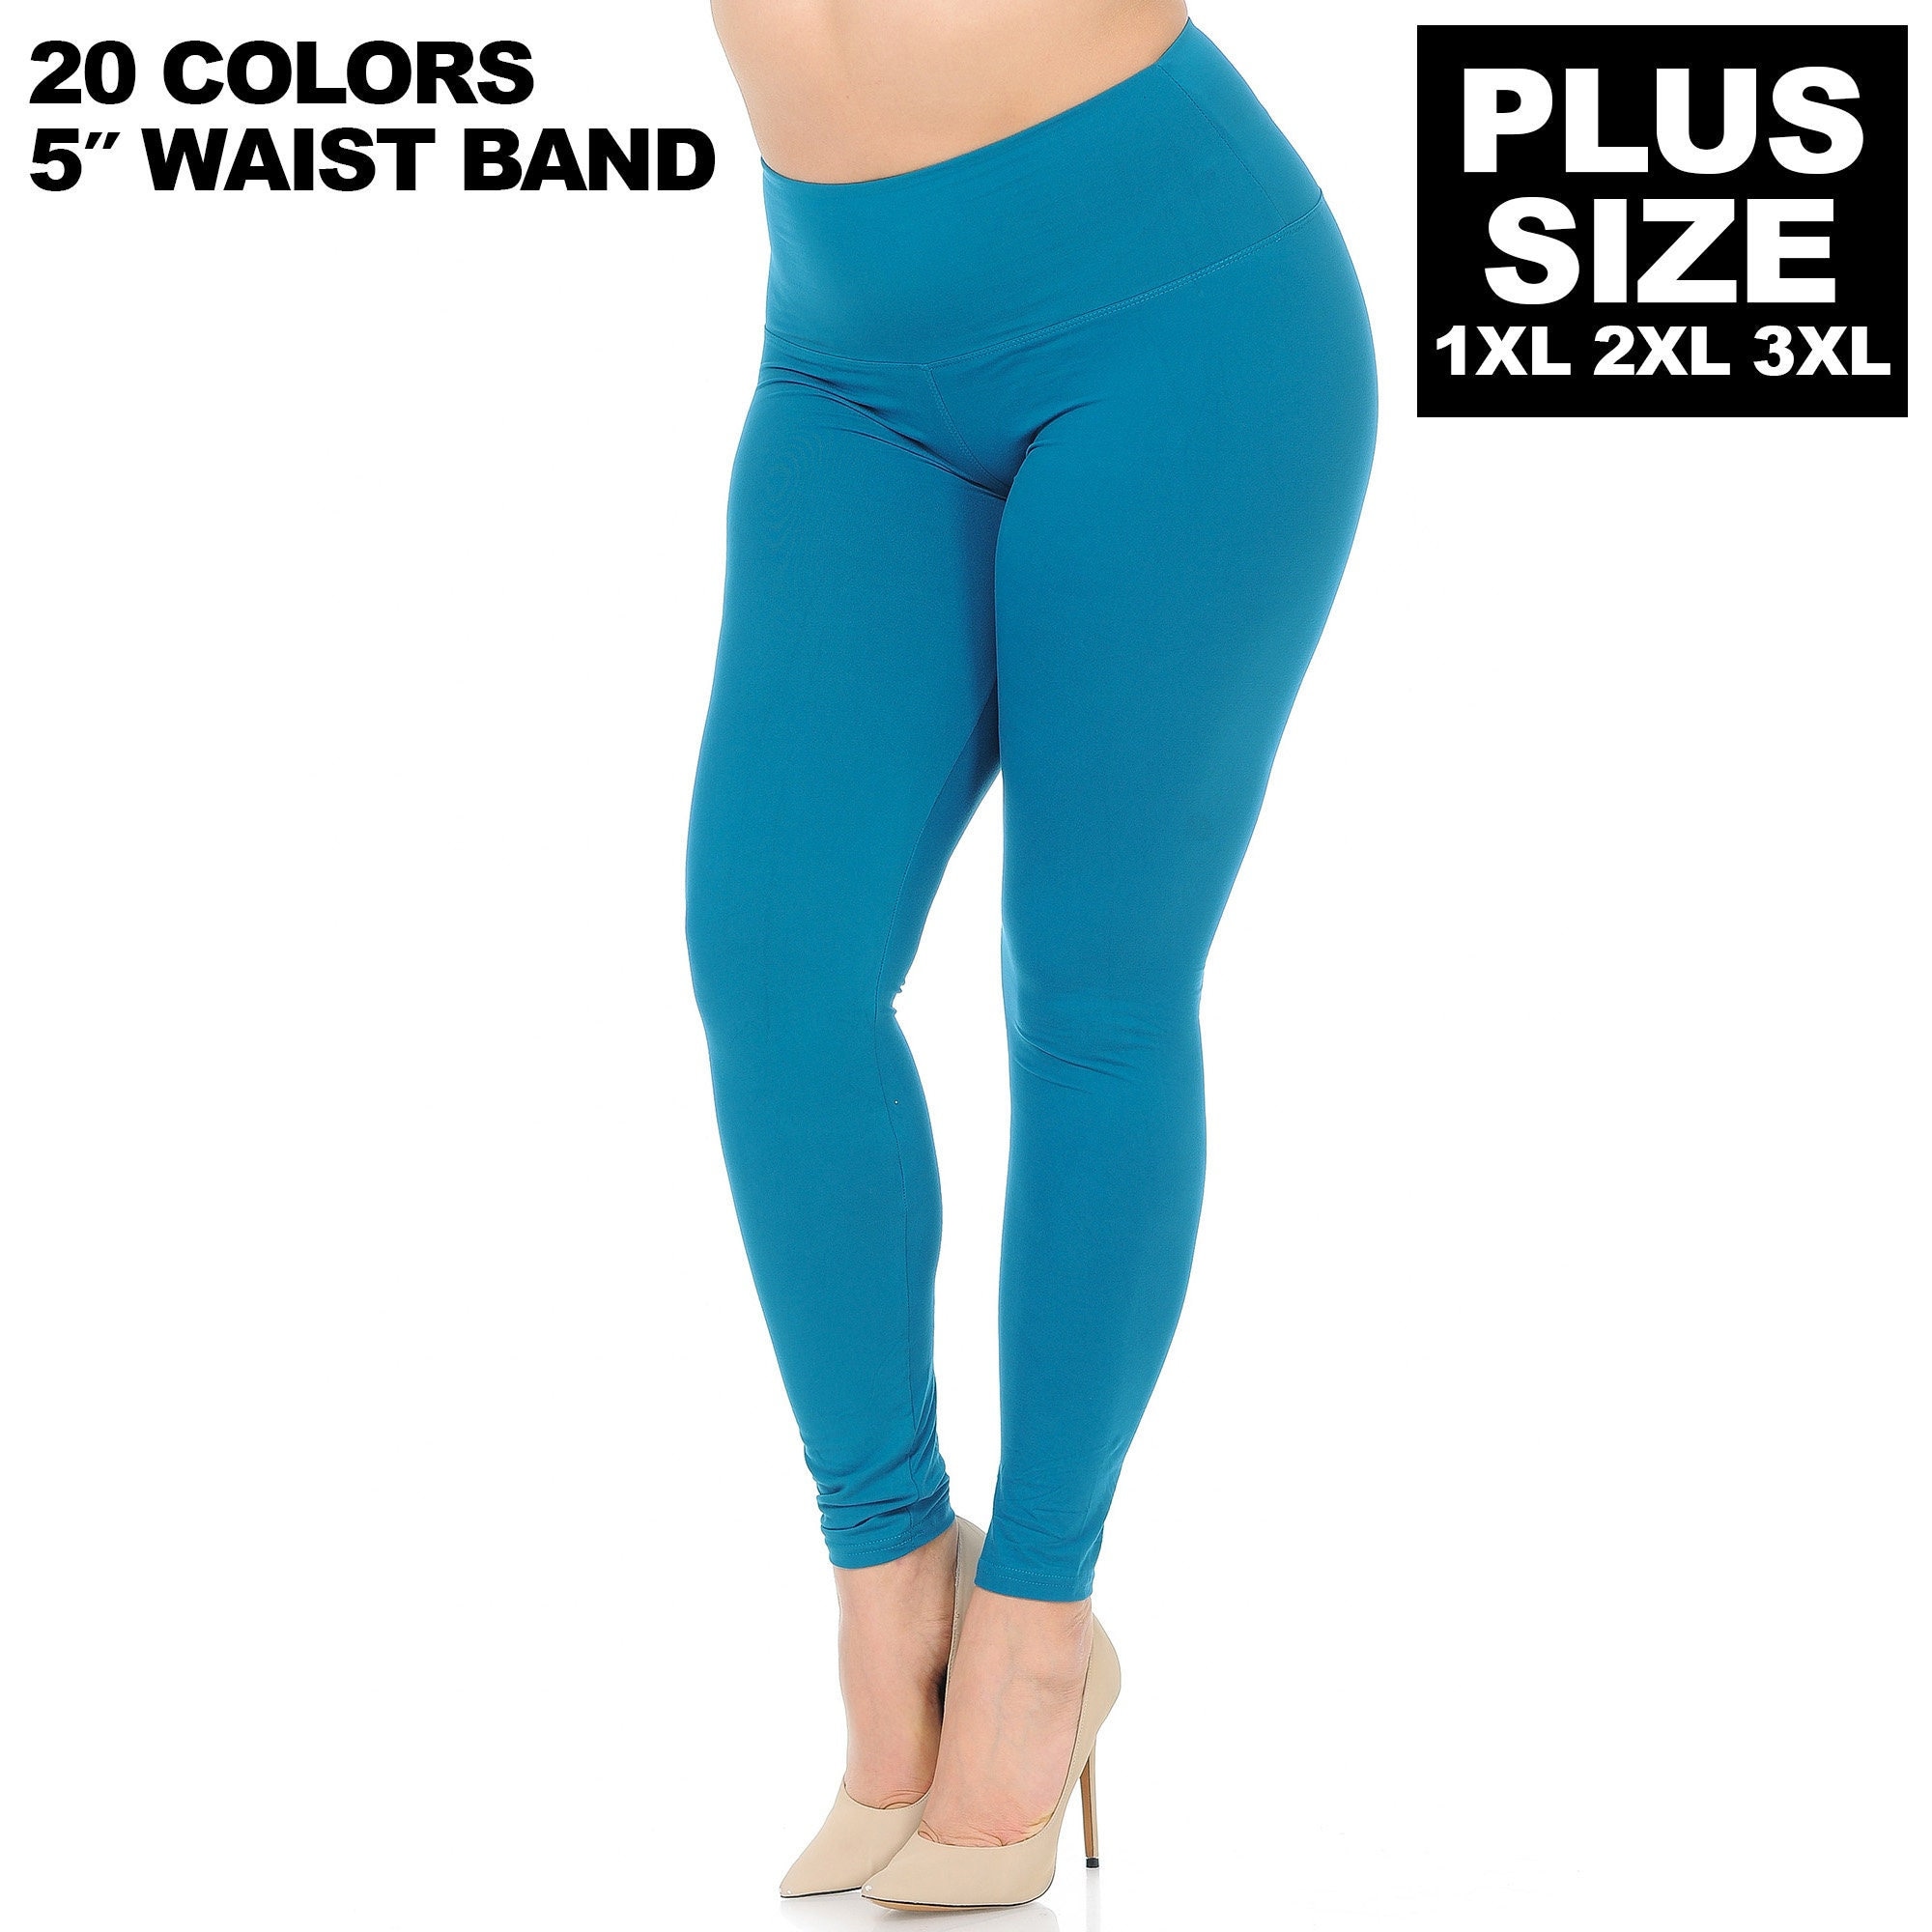 Plus Size Buttery Soft Solid Basic High Waisted Yoga Leggings 5 Inch Waist  Band Fits 1XL, 2XL, 3XL, Full Length With 20 Colors 